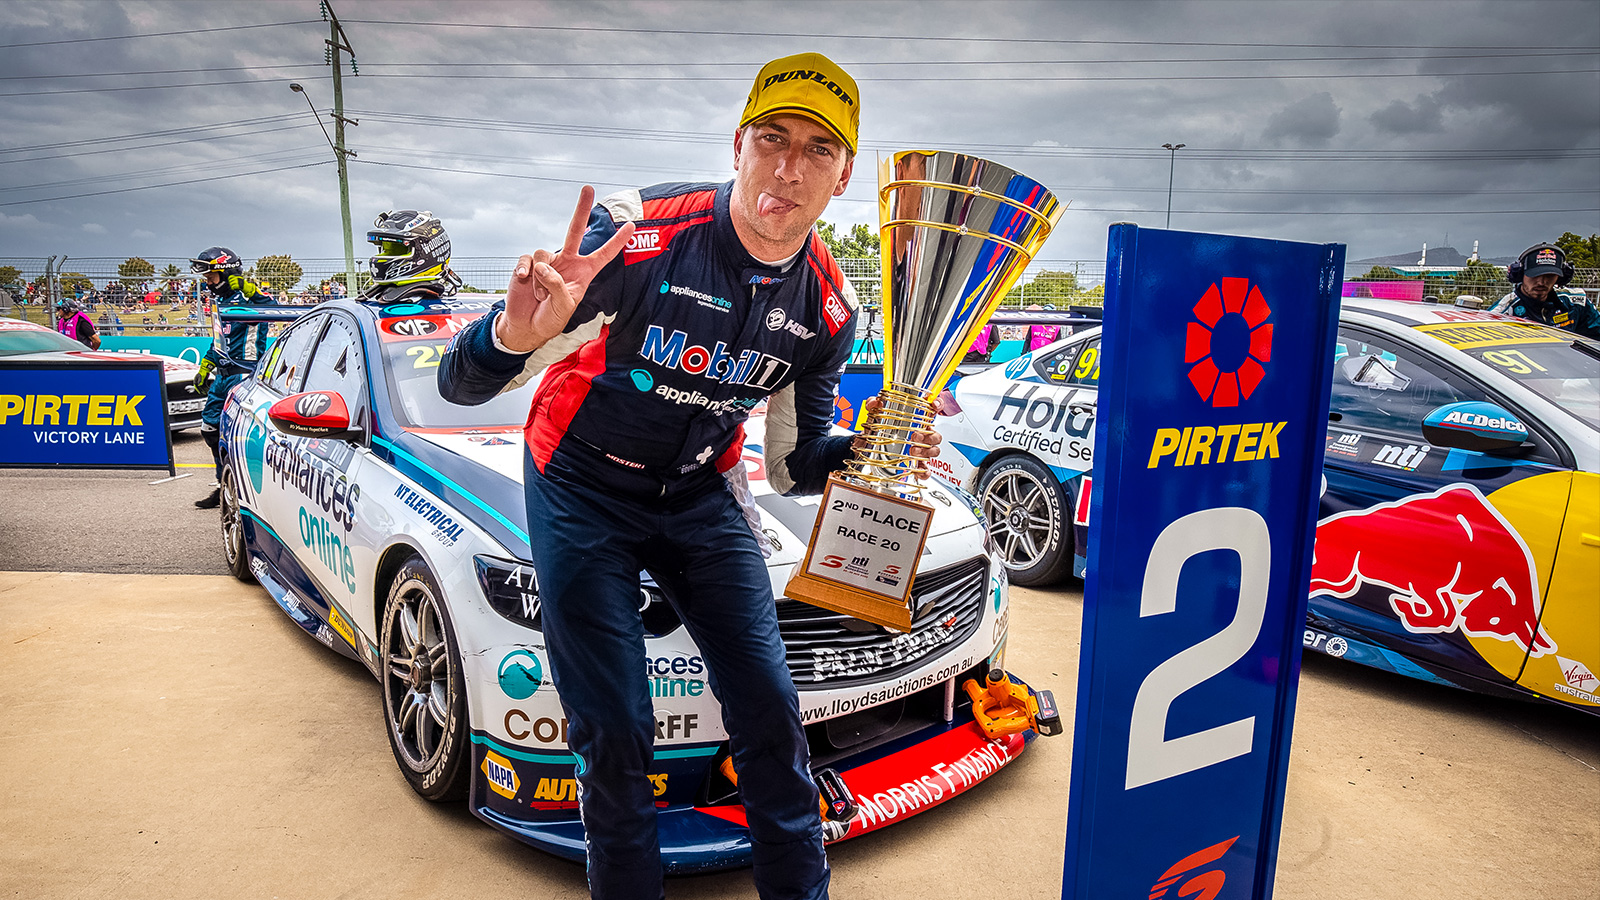 Mostert made it two podiums across the weekend.